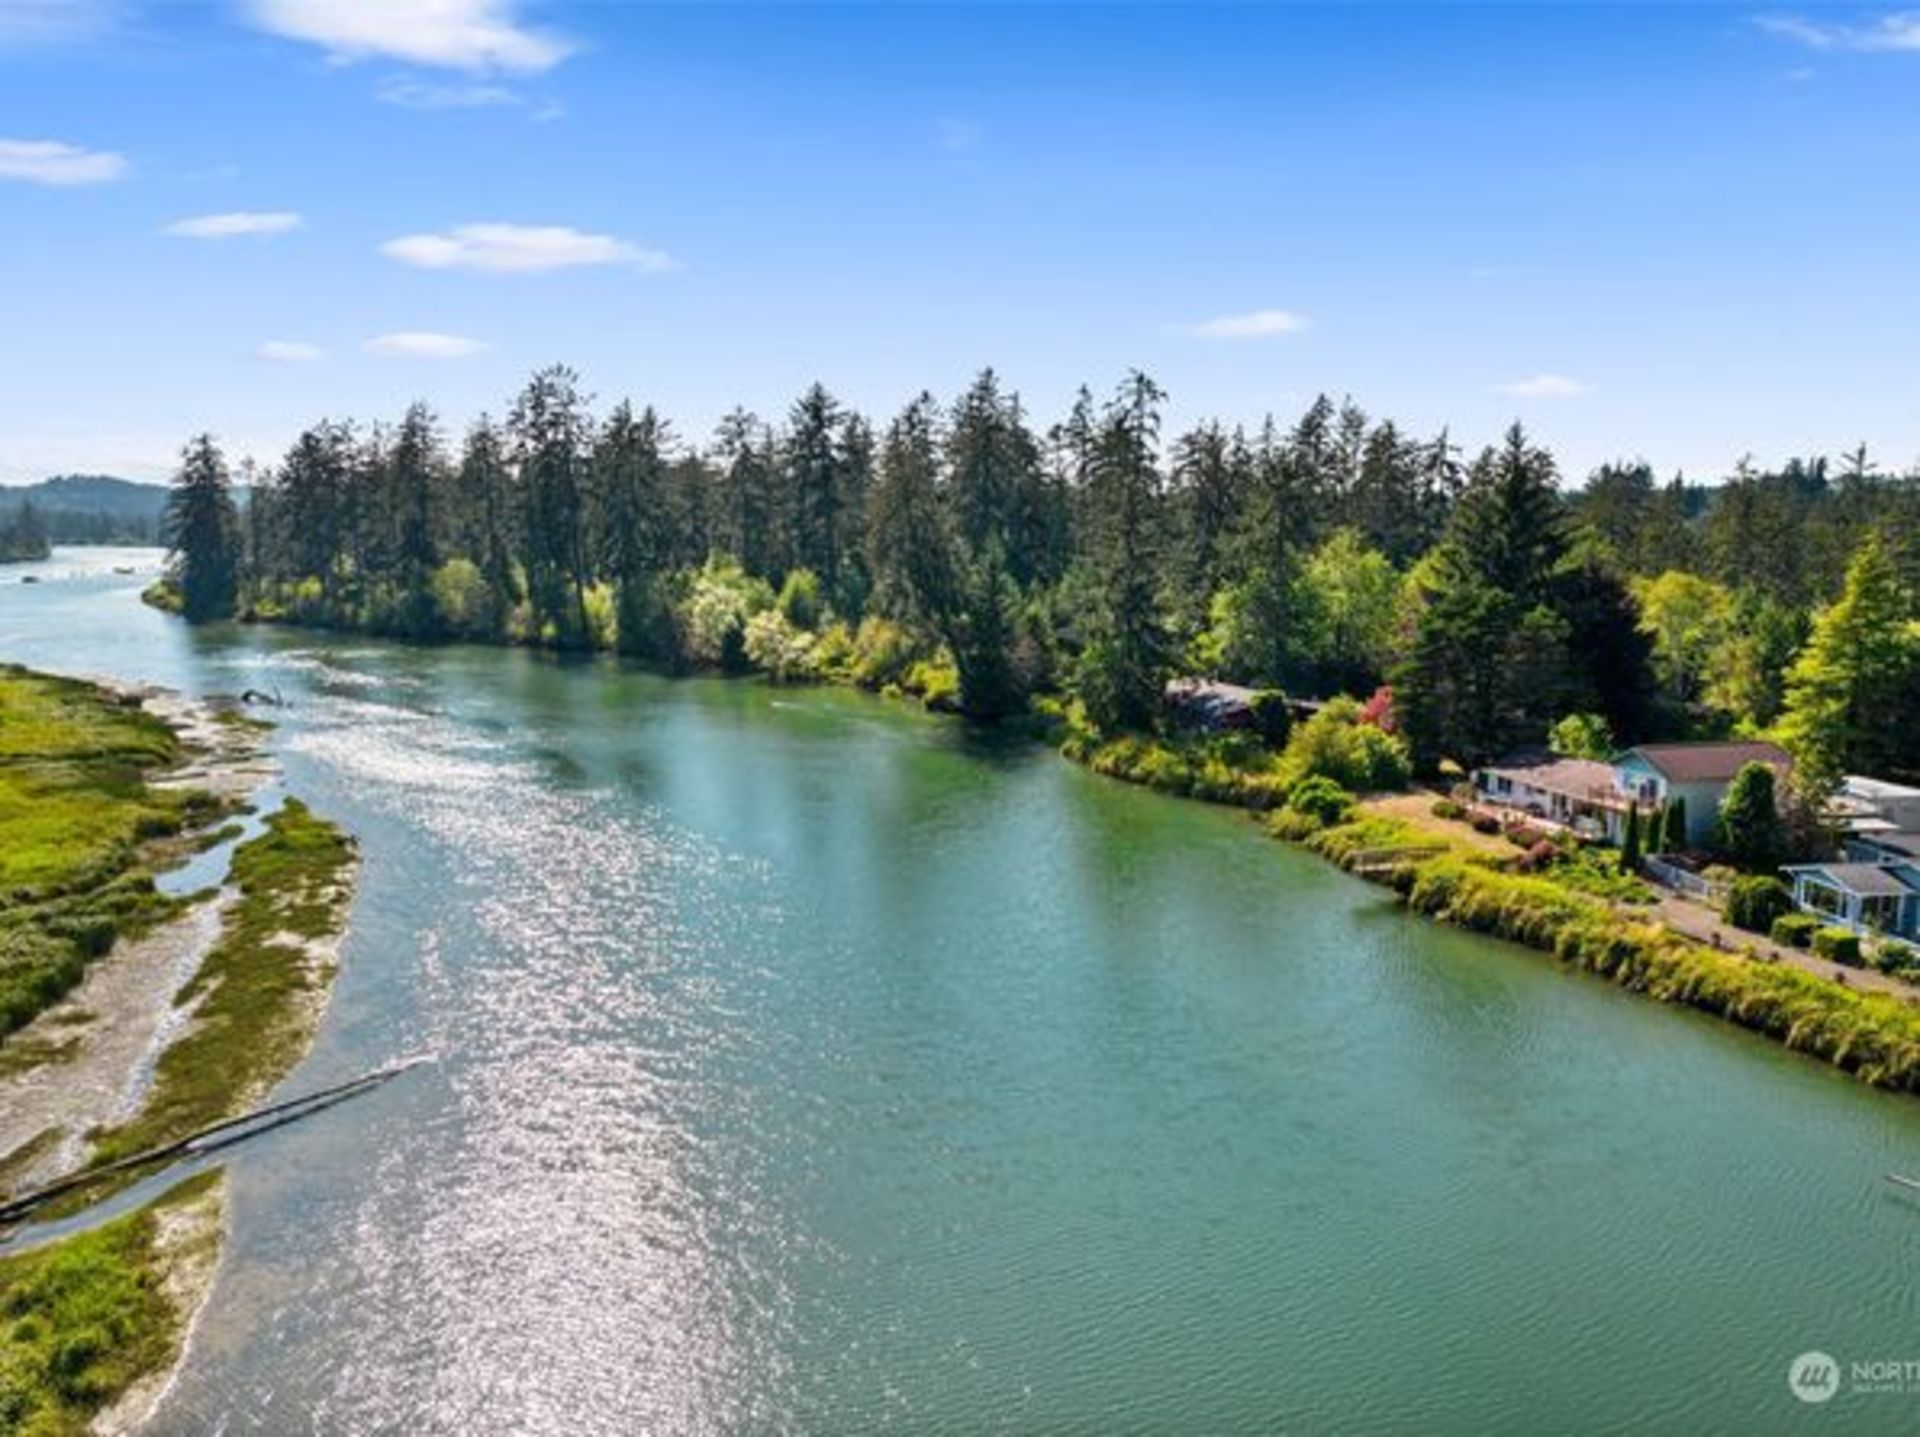 Property in Grays Harbor County, Washington, the Gateway to the Pacific! - Image 10 of 10